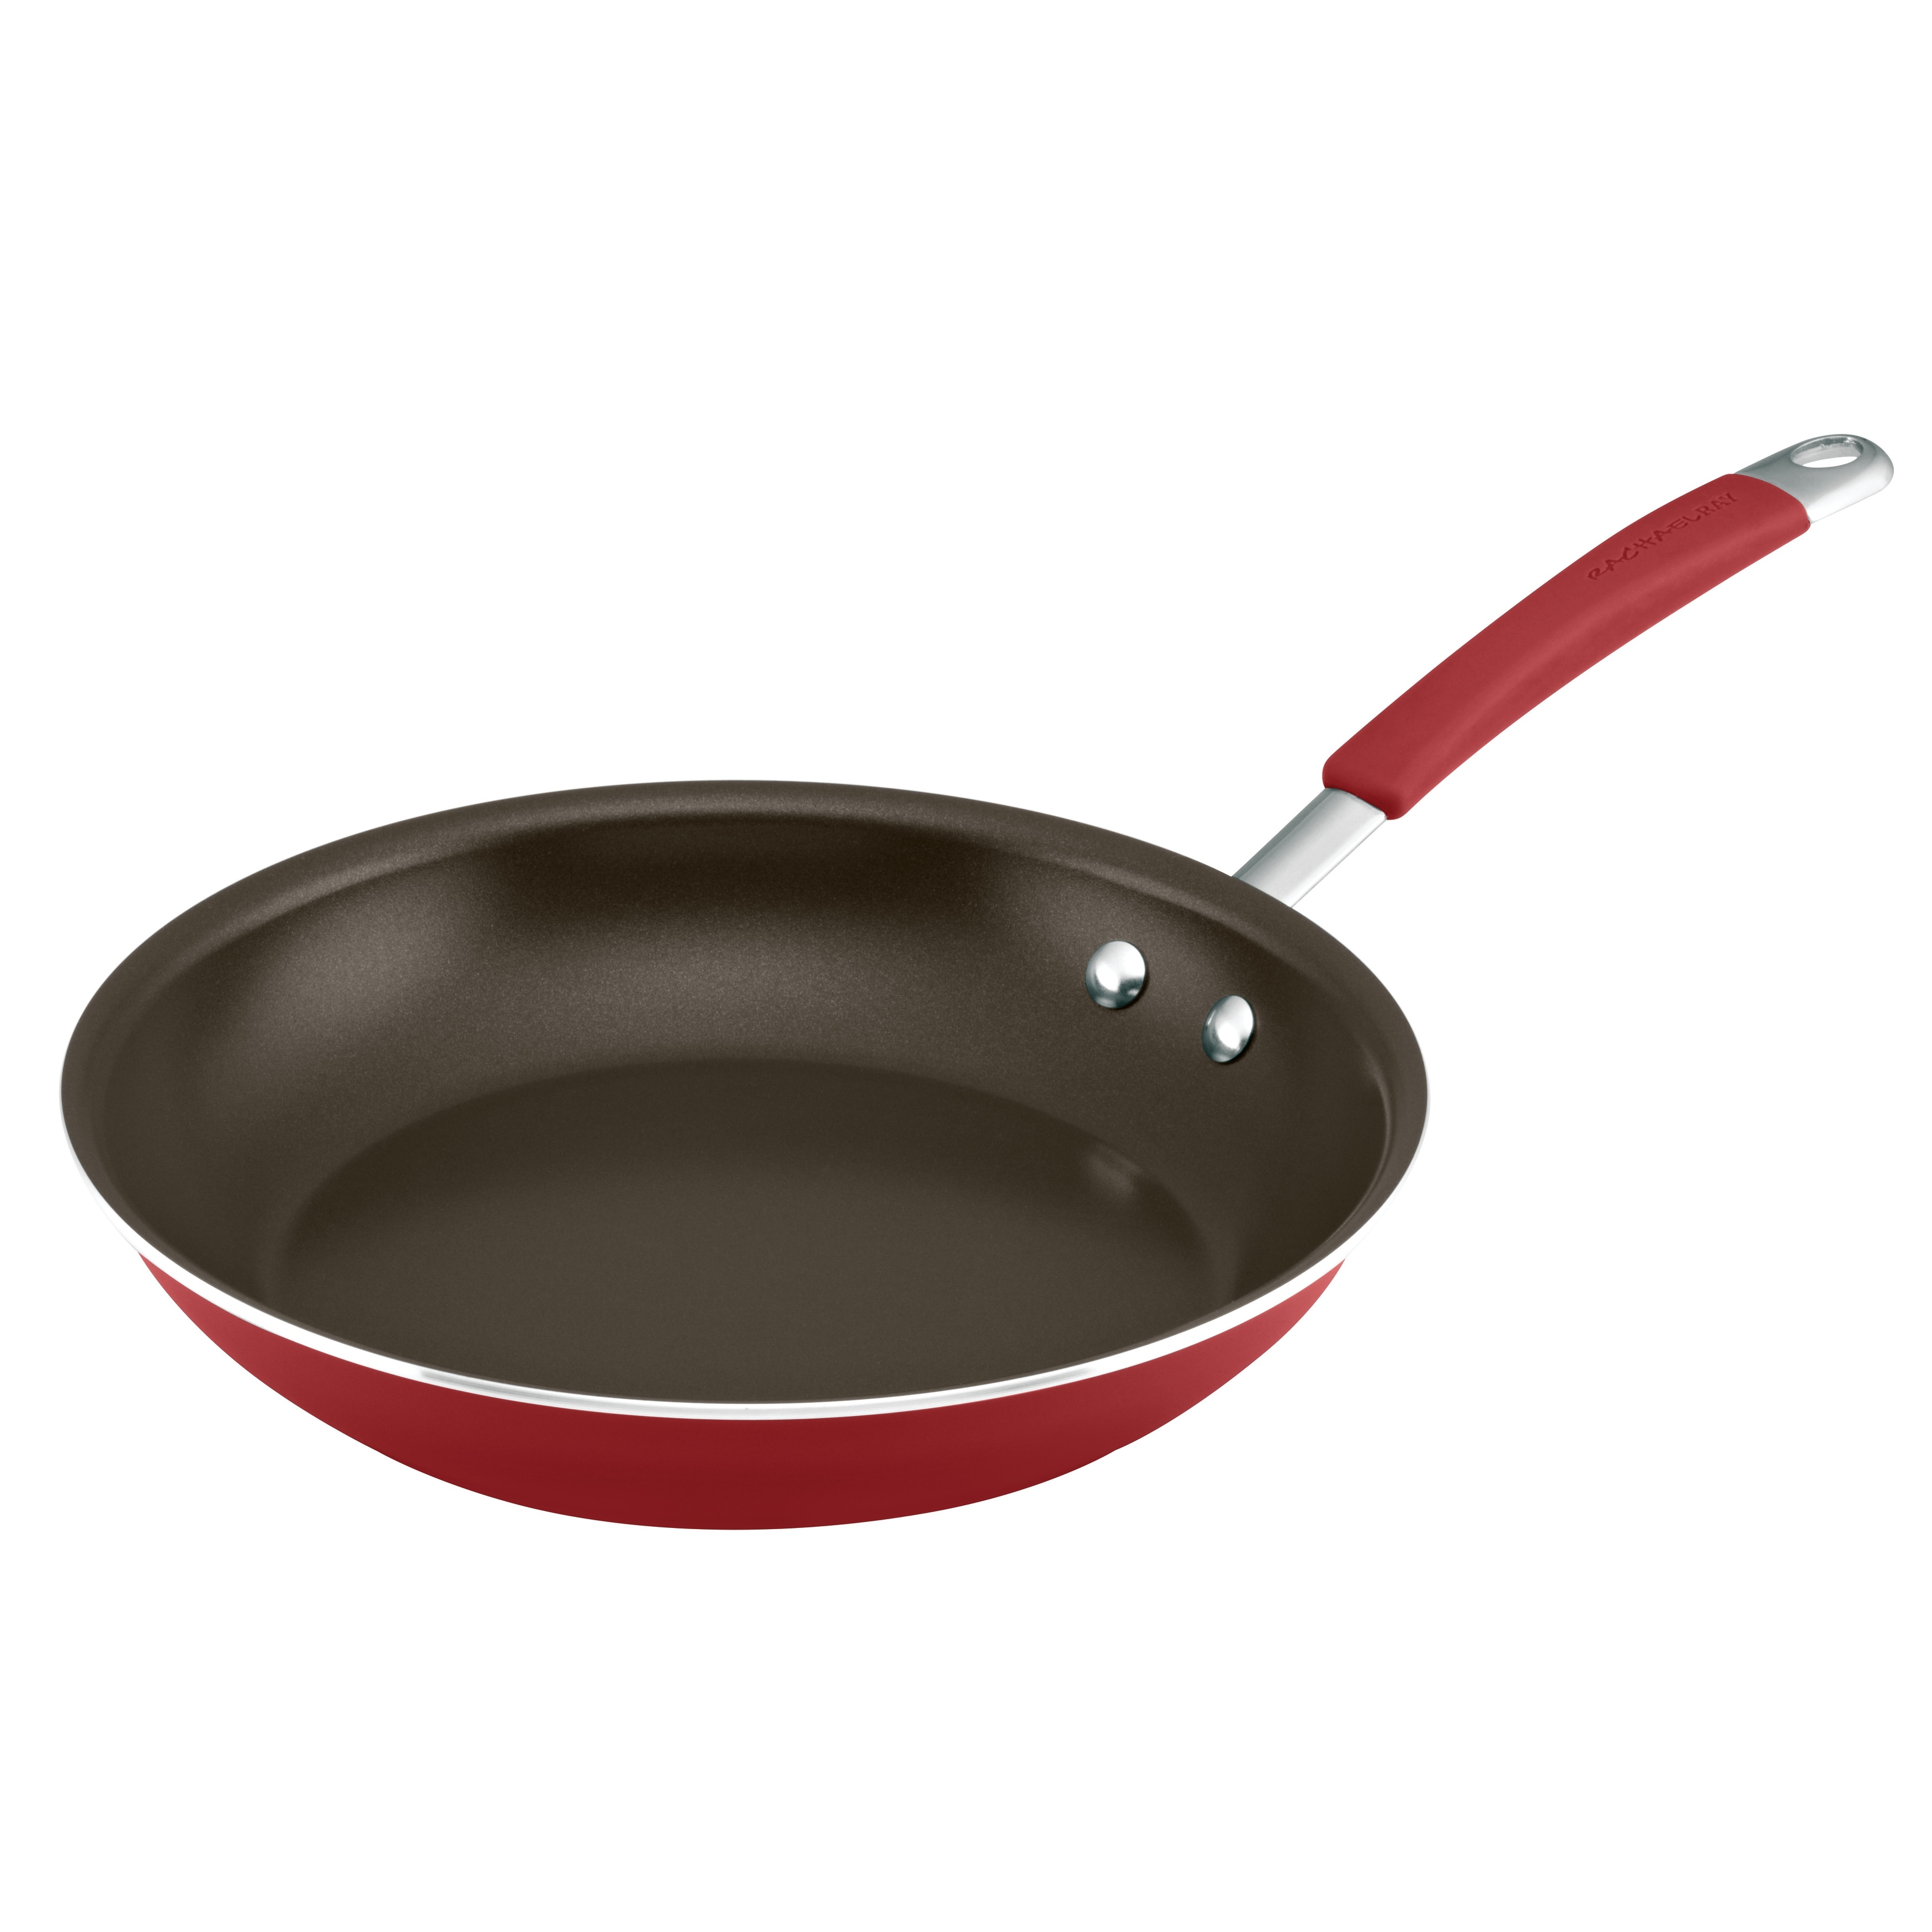 https://ak1.ostkcdn.com/images/products/is/images/direct/3d99cce4ffda7a30404096c924b2d94462f097ca/Rachael-Ray-Cucina-Hard-Porcelain-Enamel-Frying-Pan-Set%2C-9.25-Inch-and-11_inch%2C-Cranberry-Red.jpg